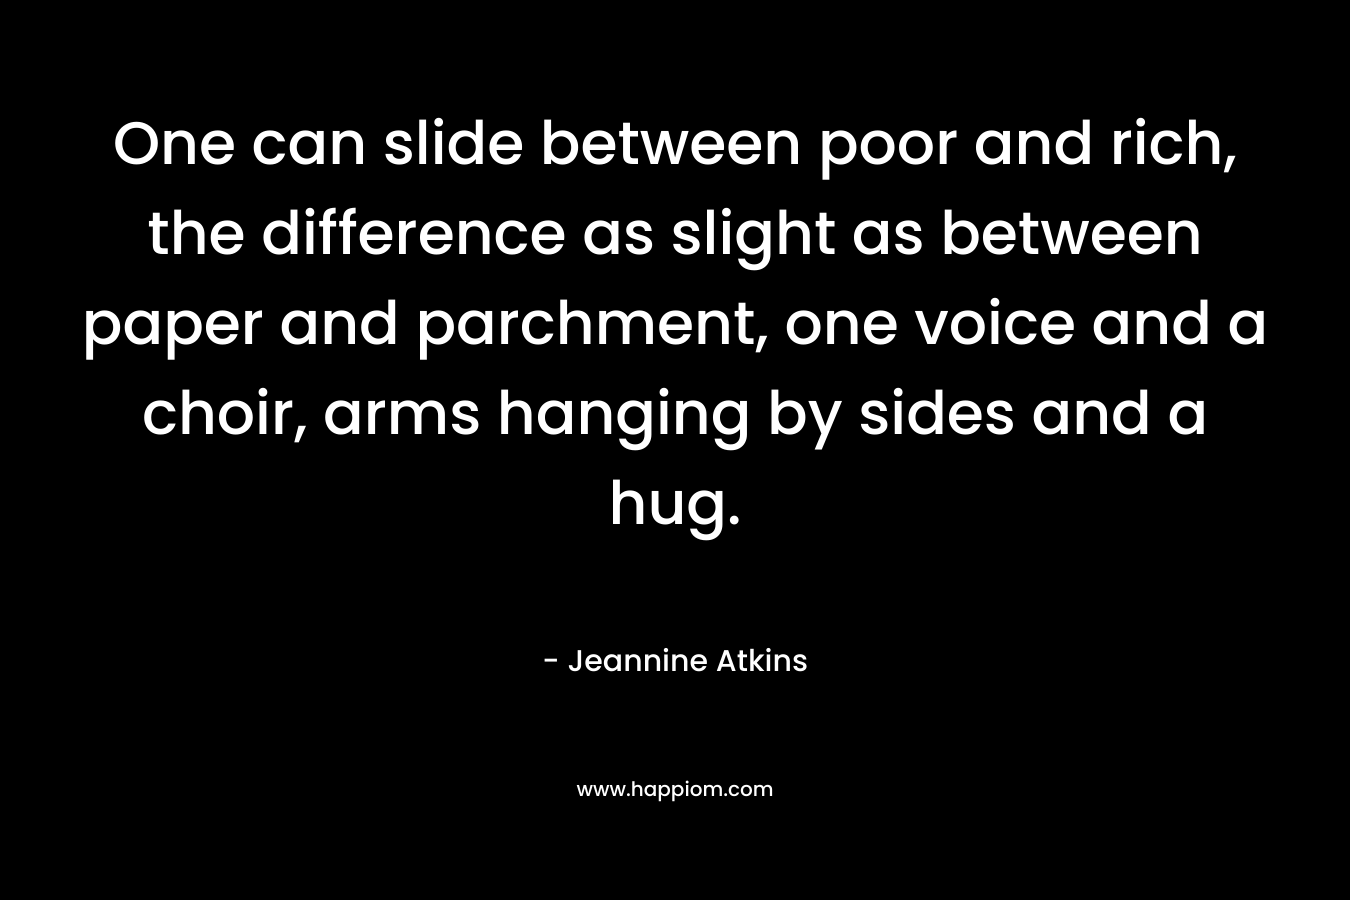 One can slide between poor and rich, the difference as slight as between paper and parchment, one voice and a choir, arms hanging by sides and a hug. – Jeannine Atkins